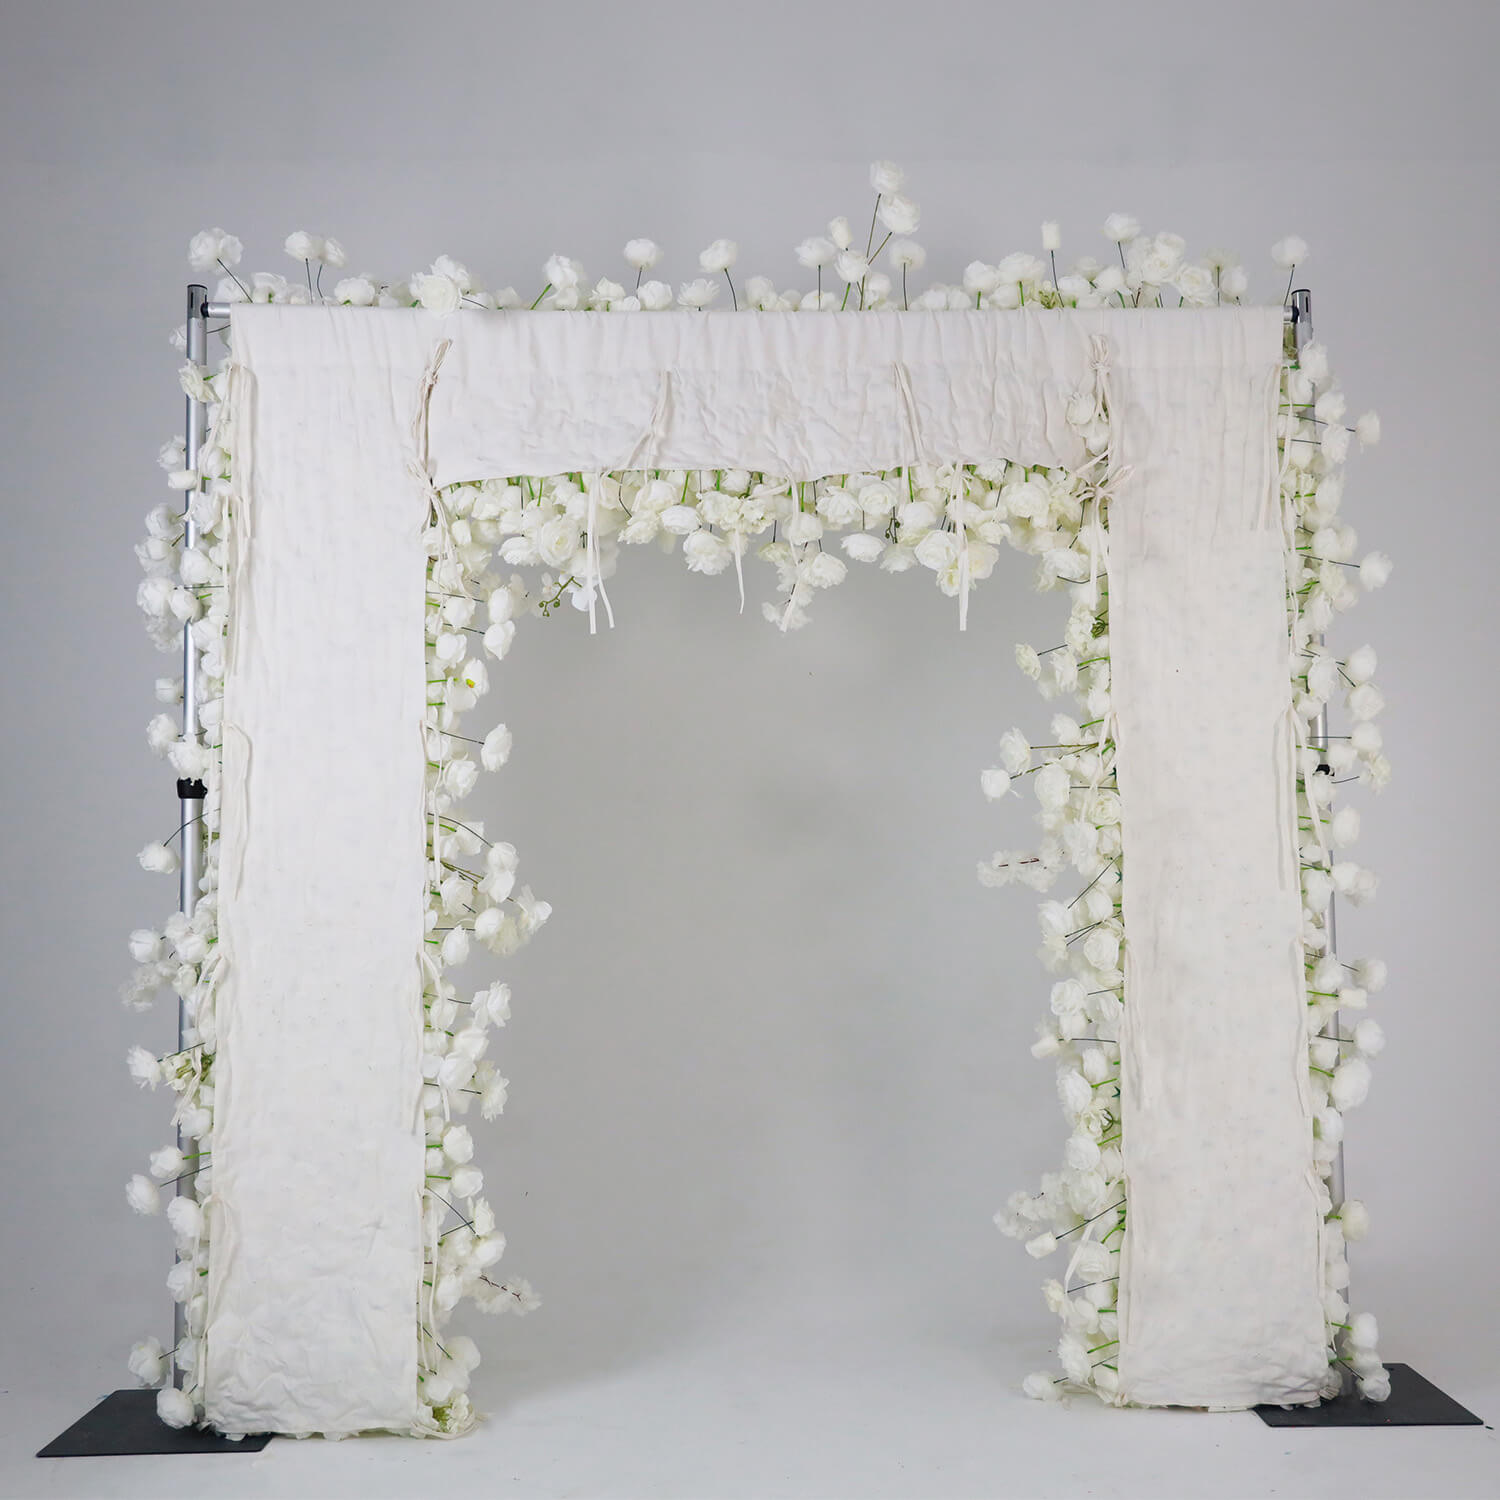 White fabric artificial flower wall is easy to install.